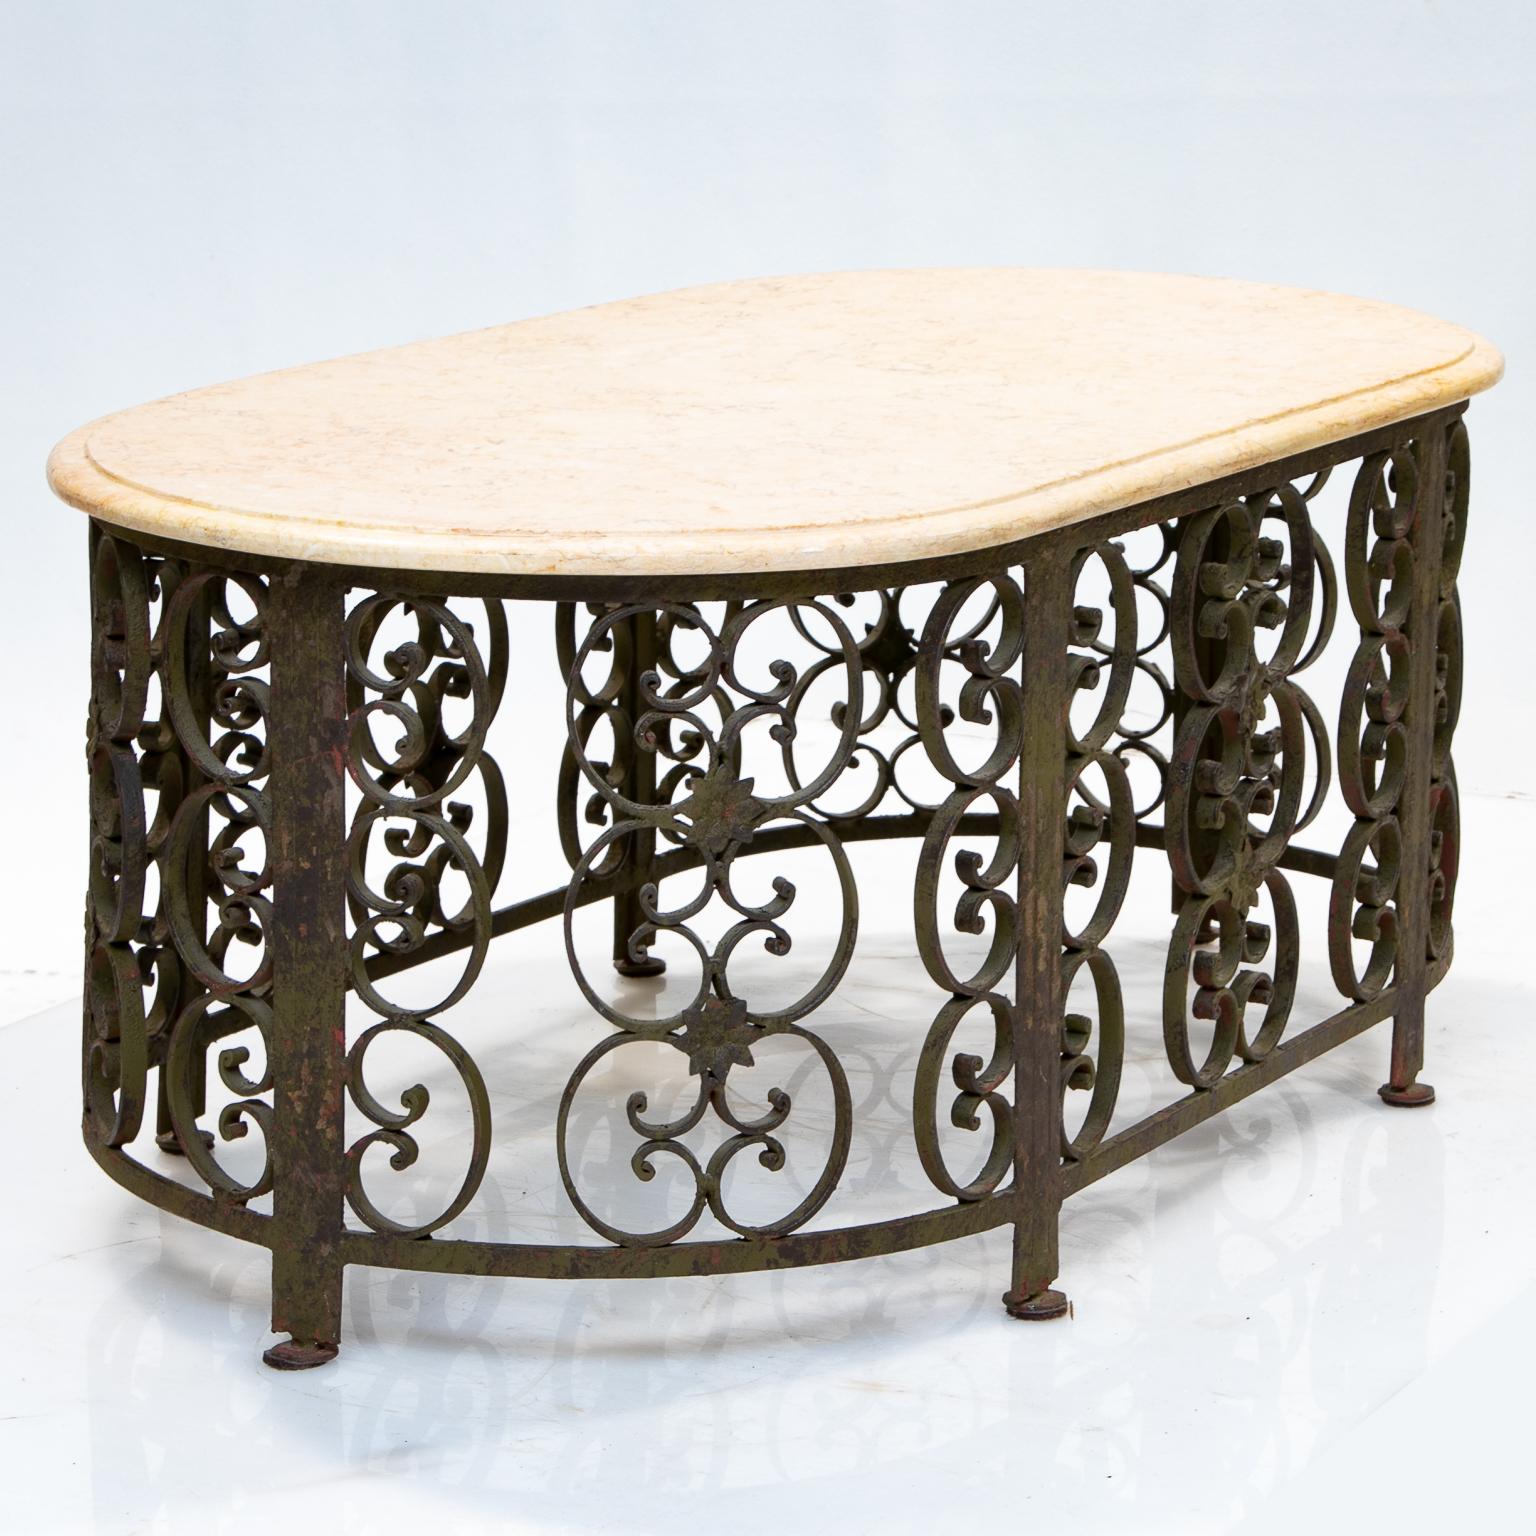 An iron and marble-top coffee table

This is an oval ended scrolled iron base with a rustic finish and having a marble top (Hauteville style). This is from an estate and unsure of history, but very nice quality and forging.